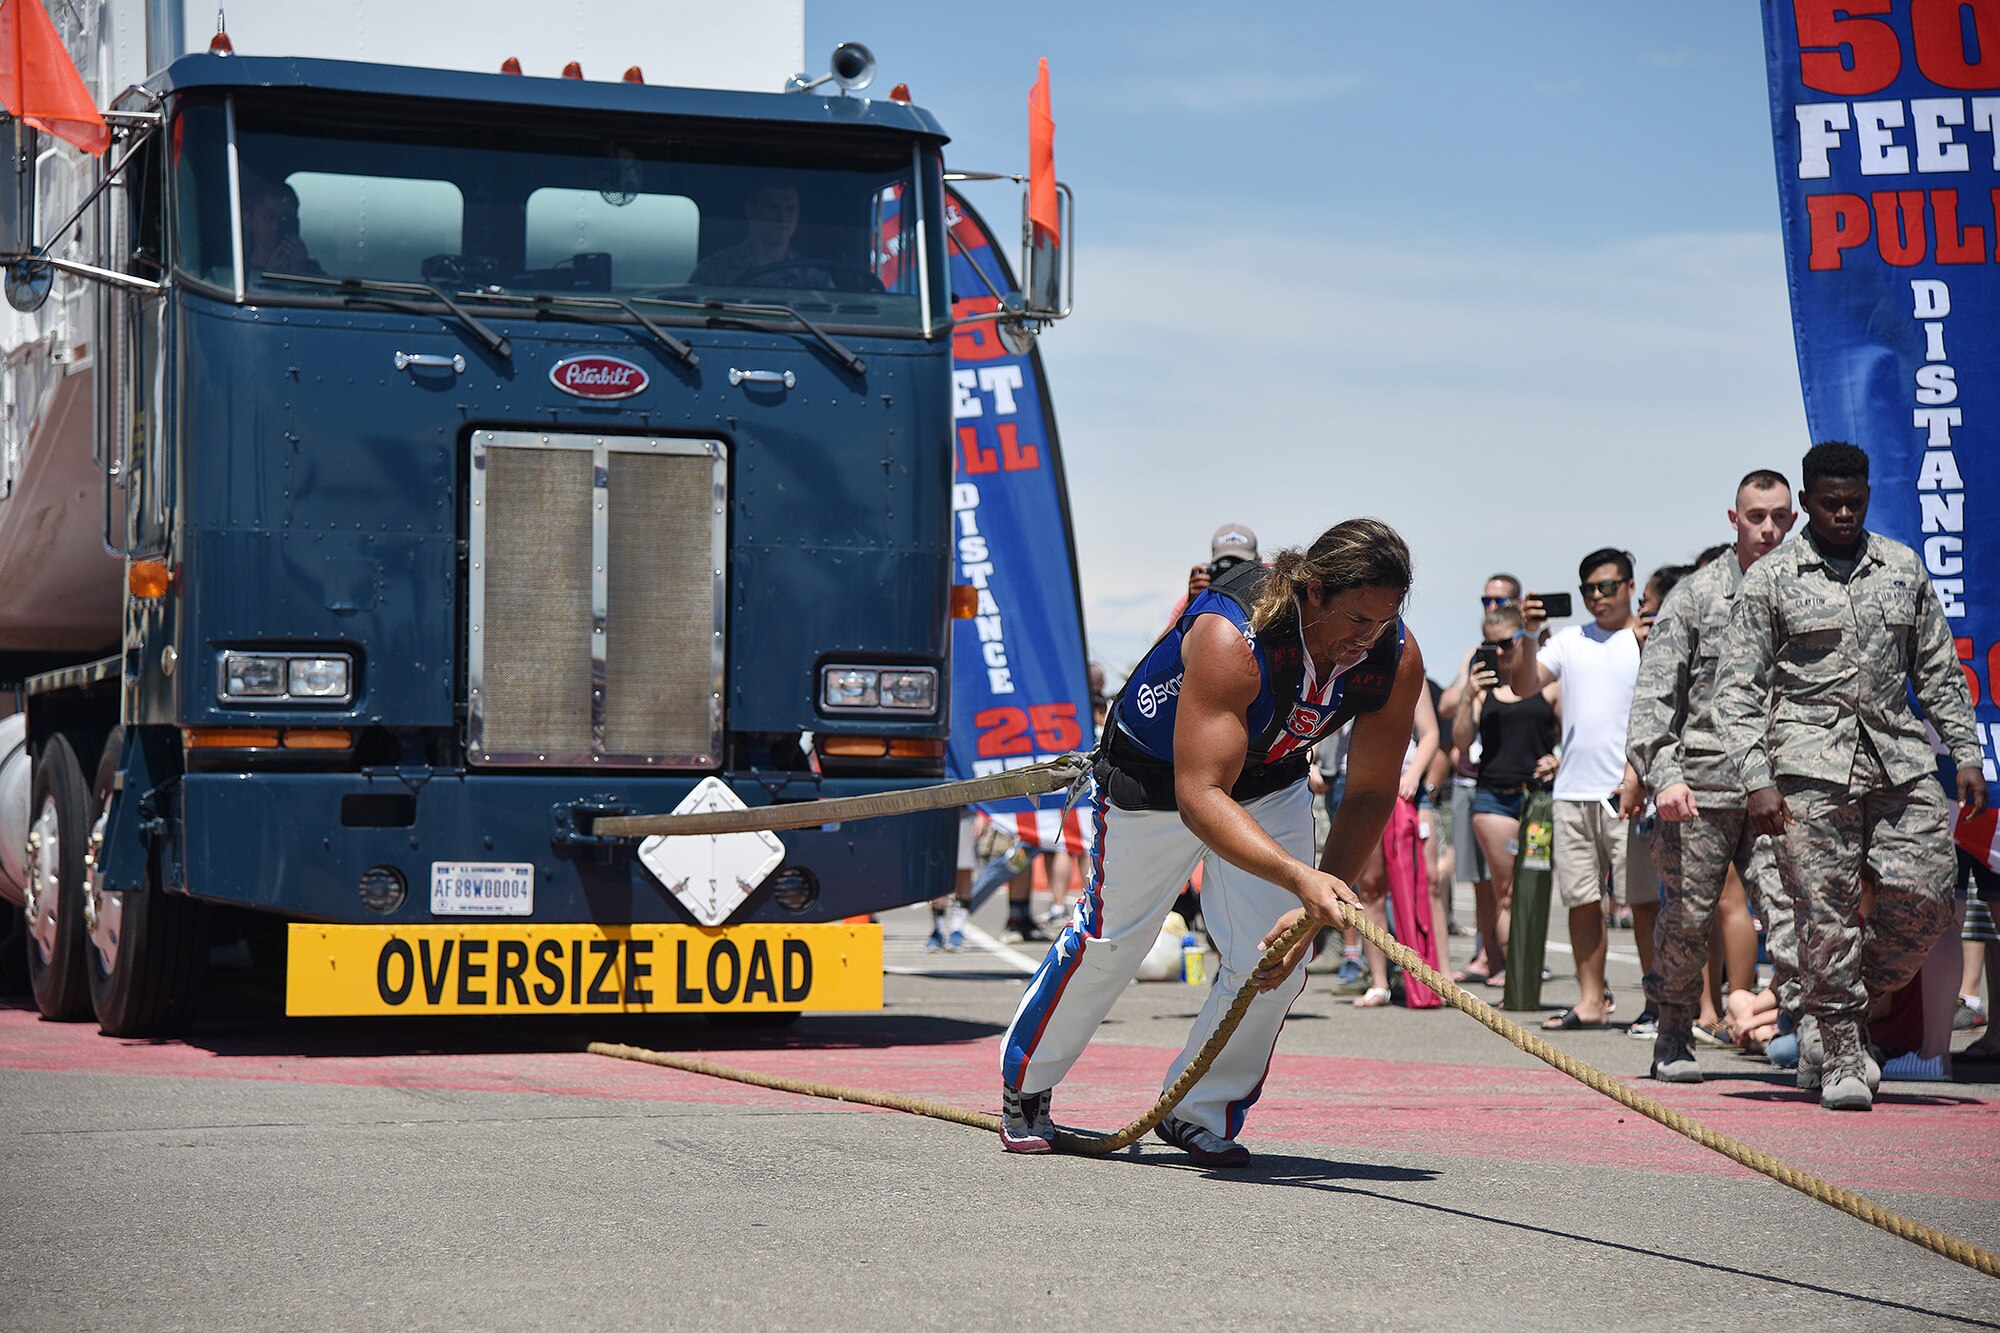 Mark Kirsch, strongman and entertainer, pulls a Transport Erector missile maintenance truck July 13, 2019, at the “Mission Over Malmstrom” open house event on Malmstrom Air Force Base, Mont.